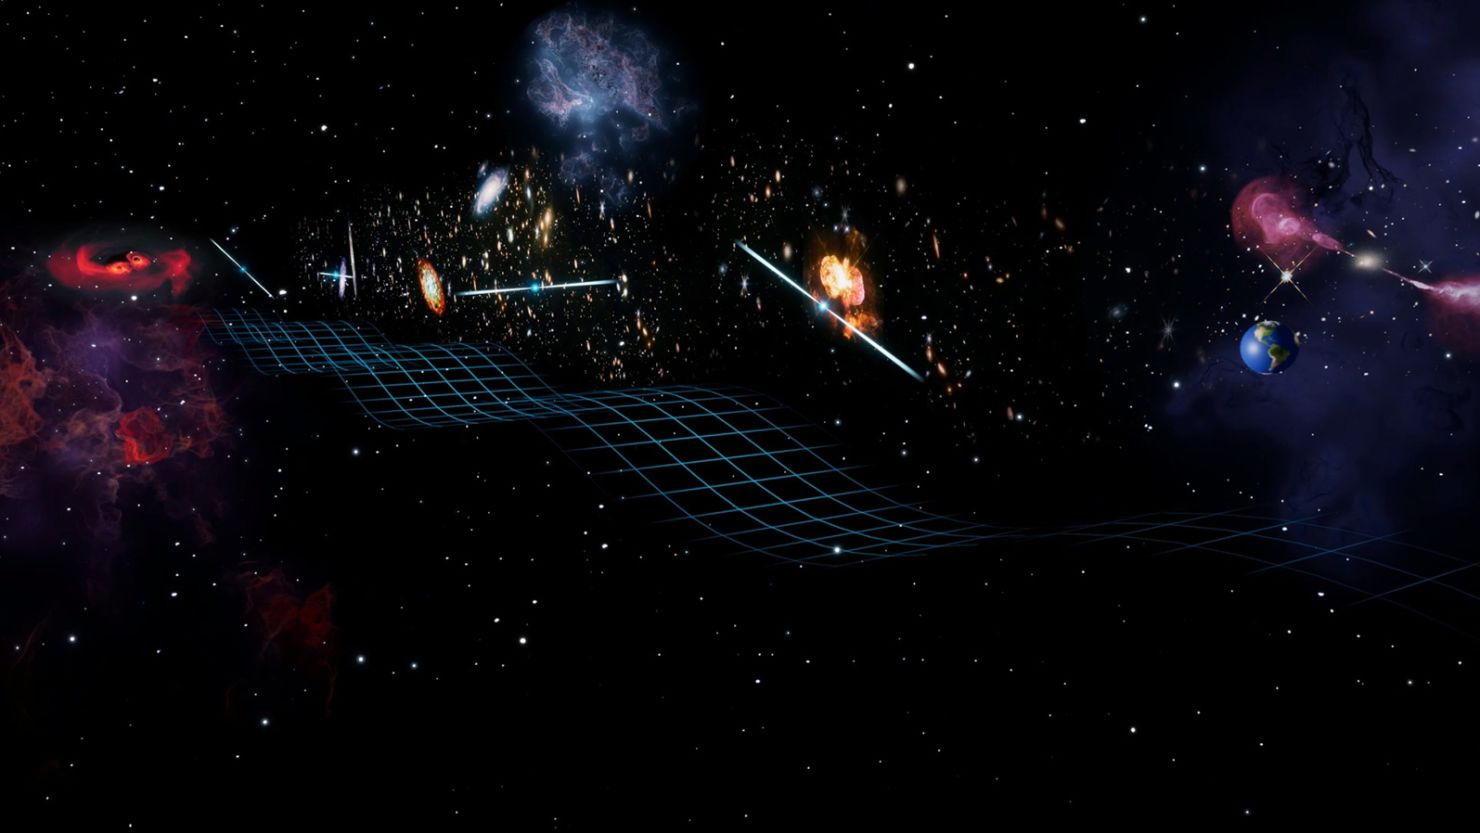 An artist's rendering shows gravitational waves emanating from a pair of close-orbiting black holes on the left. The waves are passing by several pulsars and the Earth to the right.